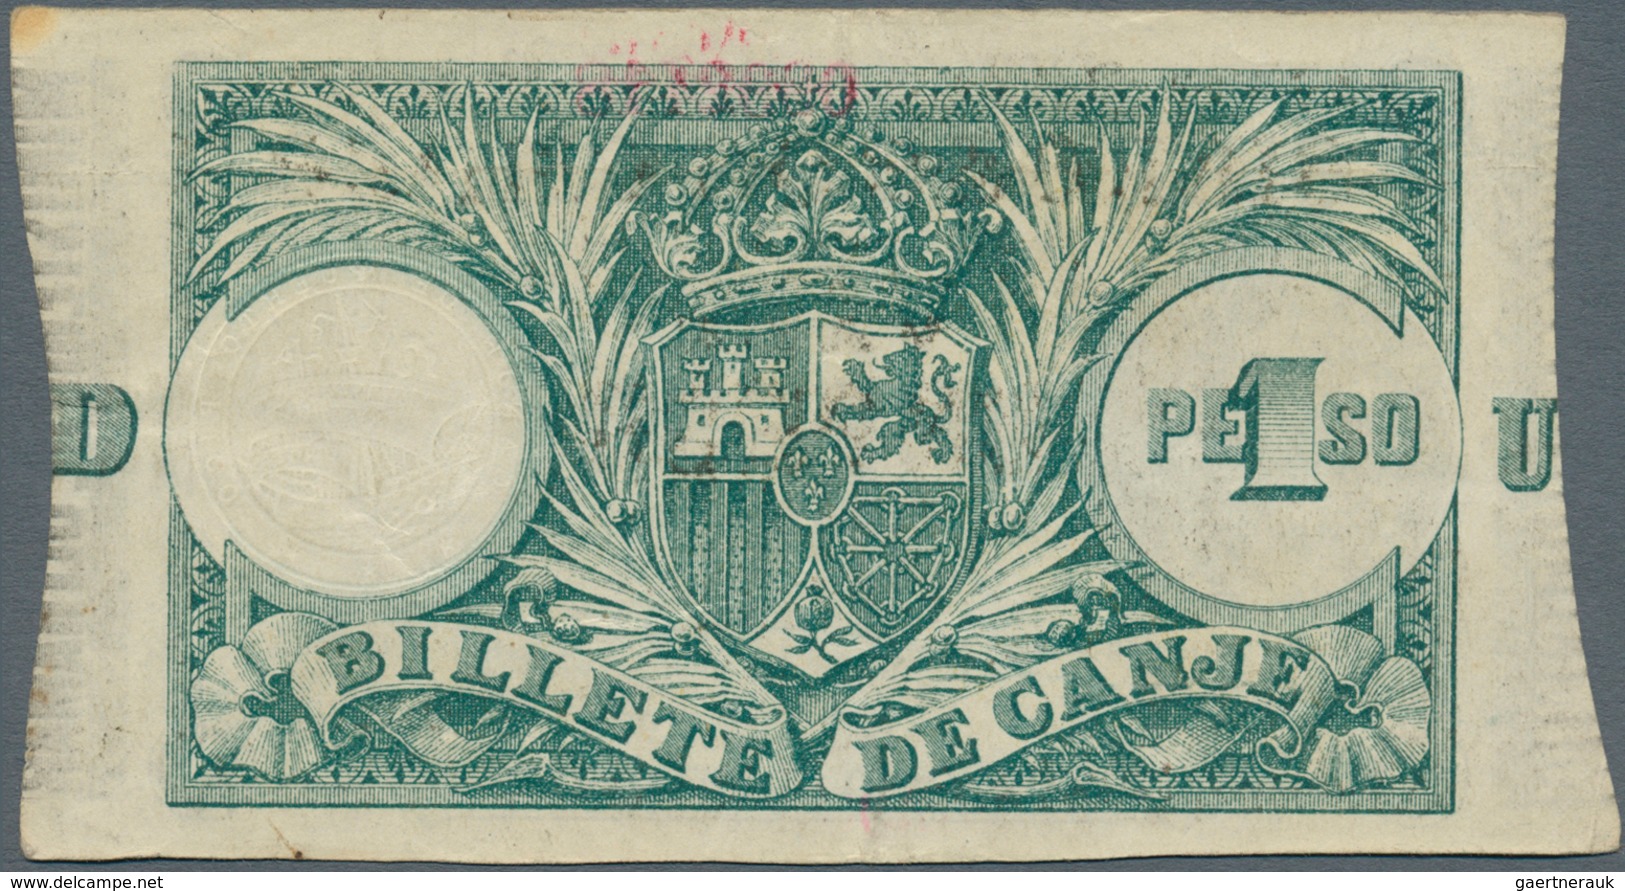 02246 Puerto Rico: 1 Peso 1895 P. 7a, Light Center Fold And Handling In Paper, No Holes Or Tears, Still St - Puerto Rico